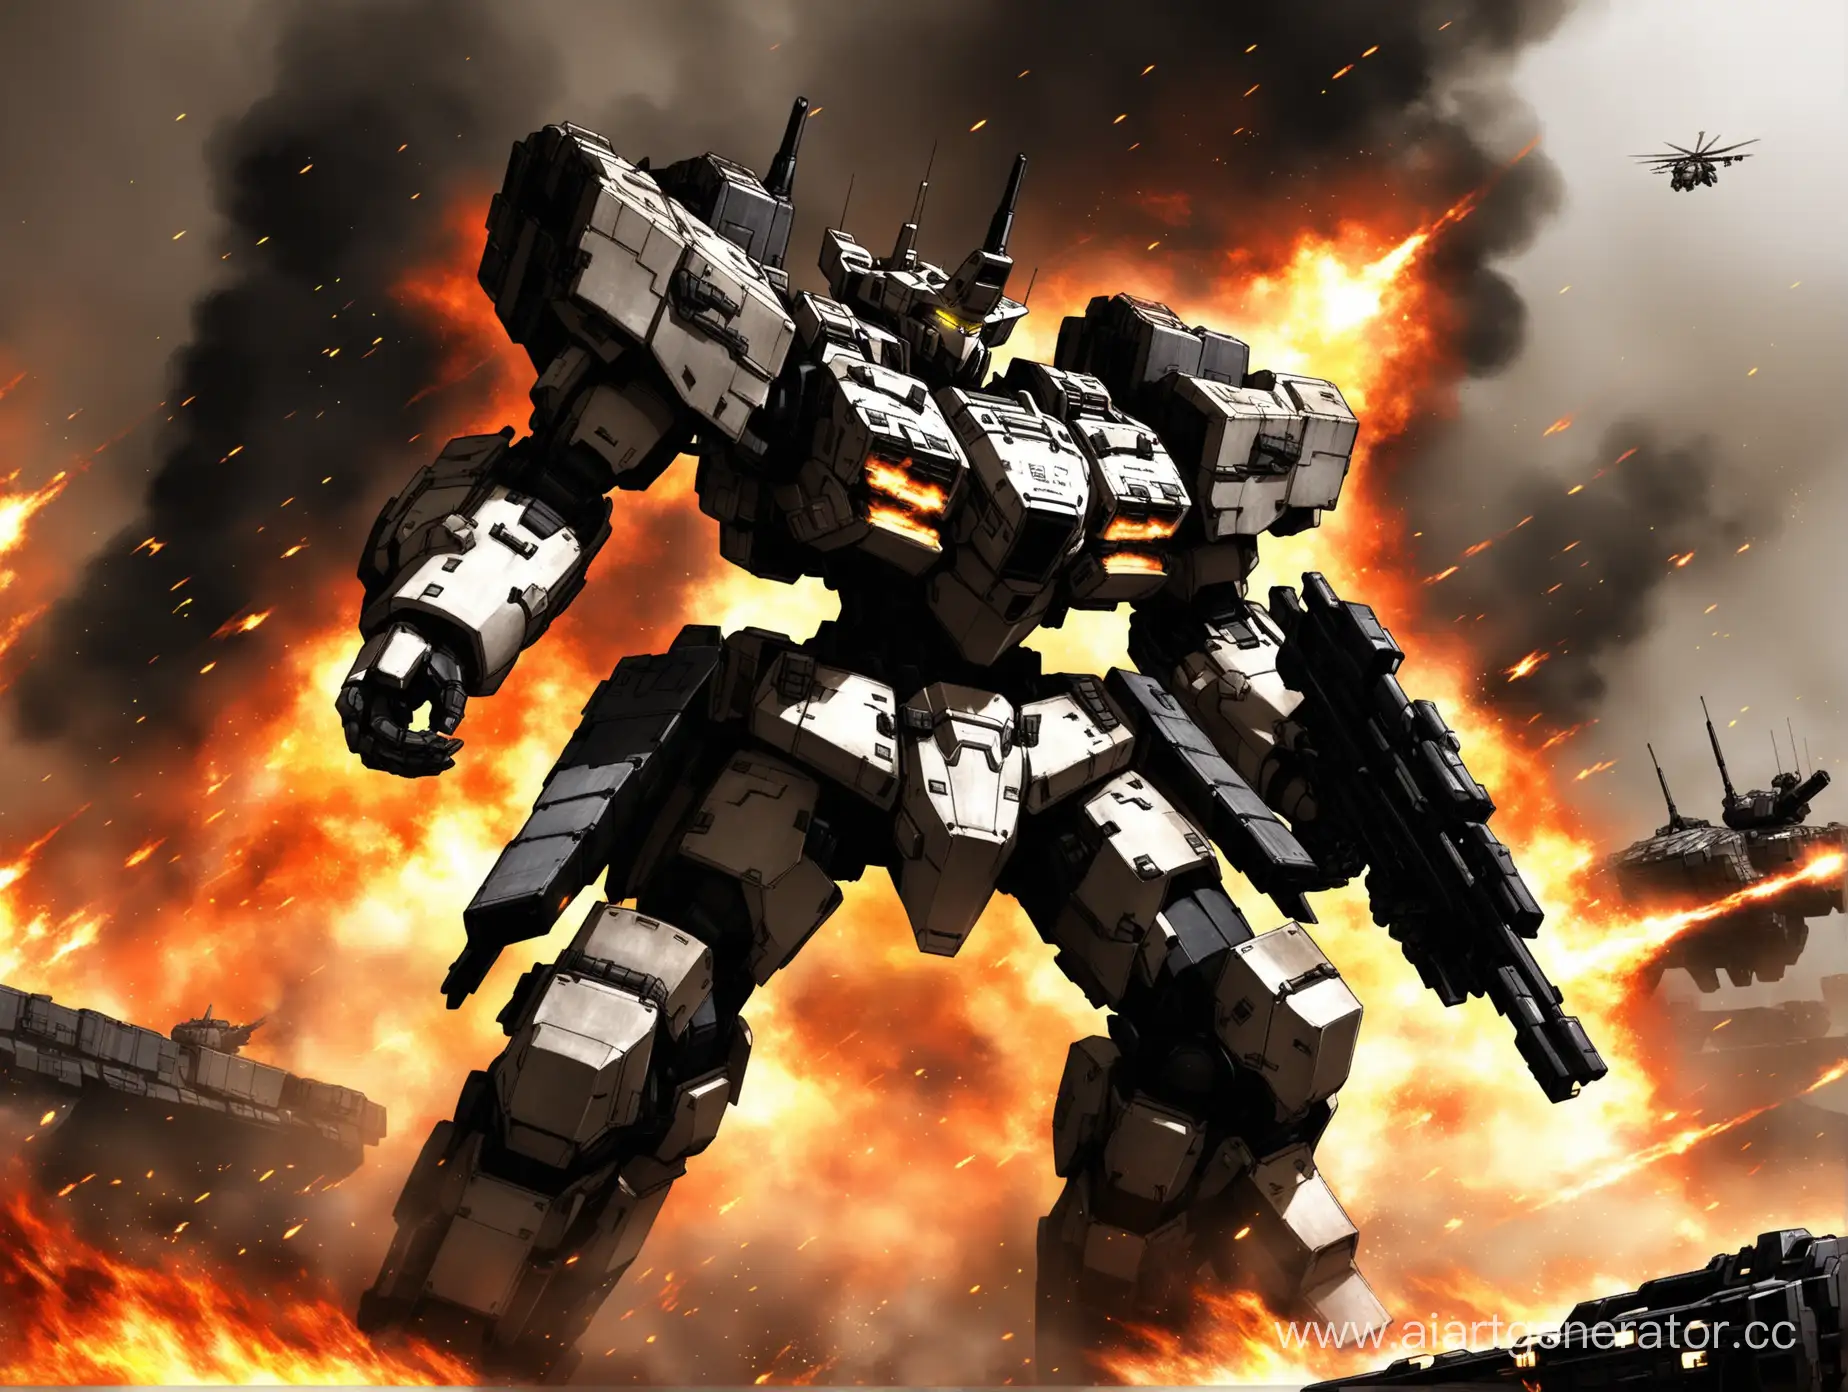 Mech-Warriors-Battling-Amidst-Flames-in-Armored-Core-6-Fires-of-Rubicon